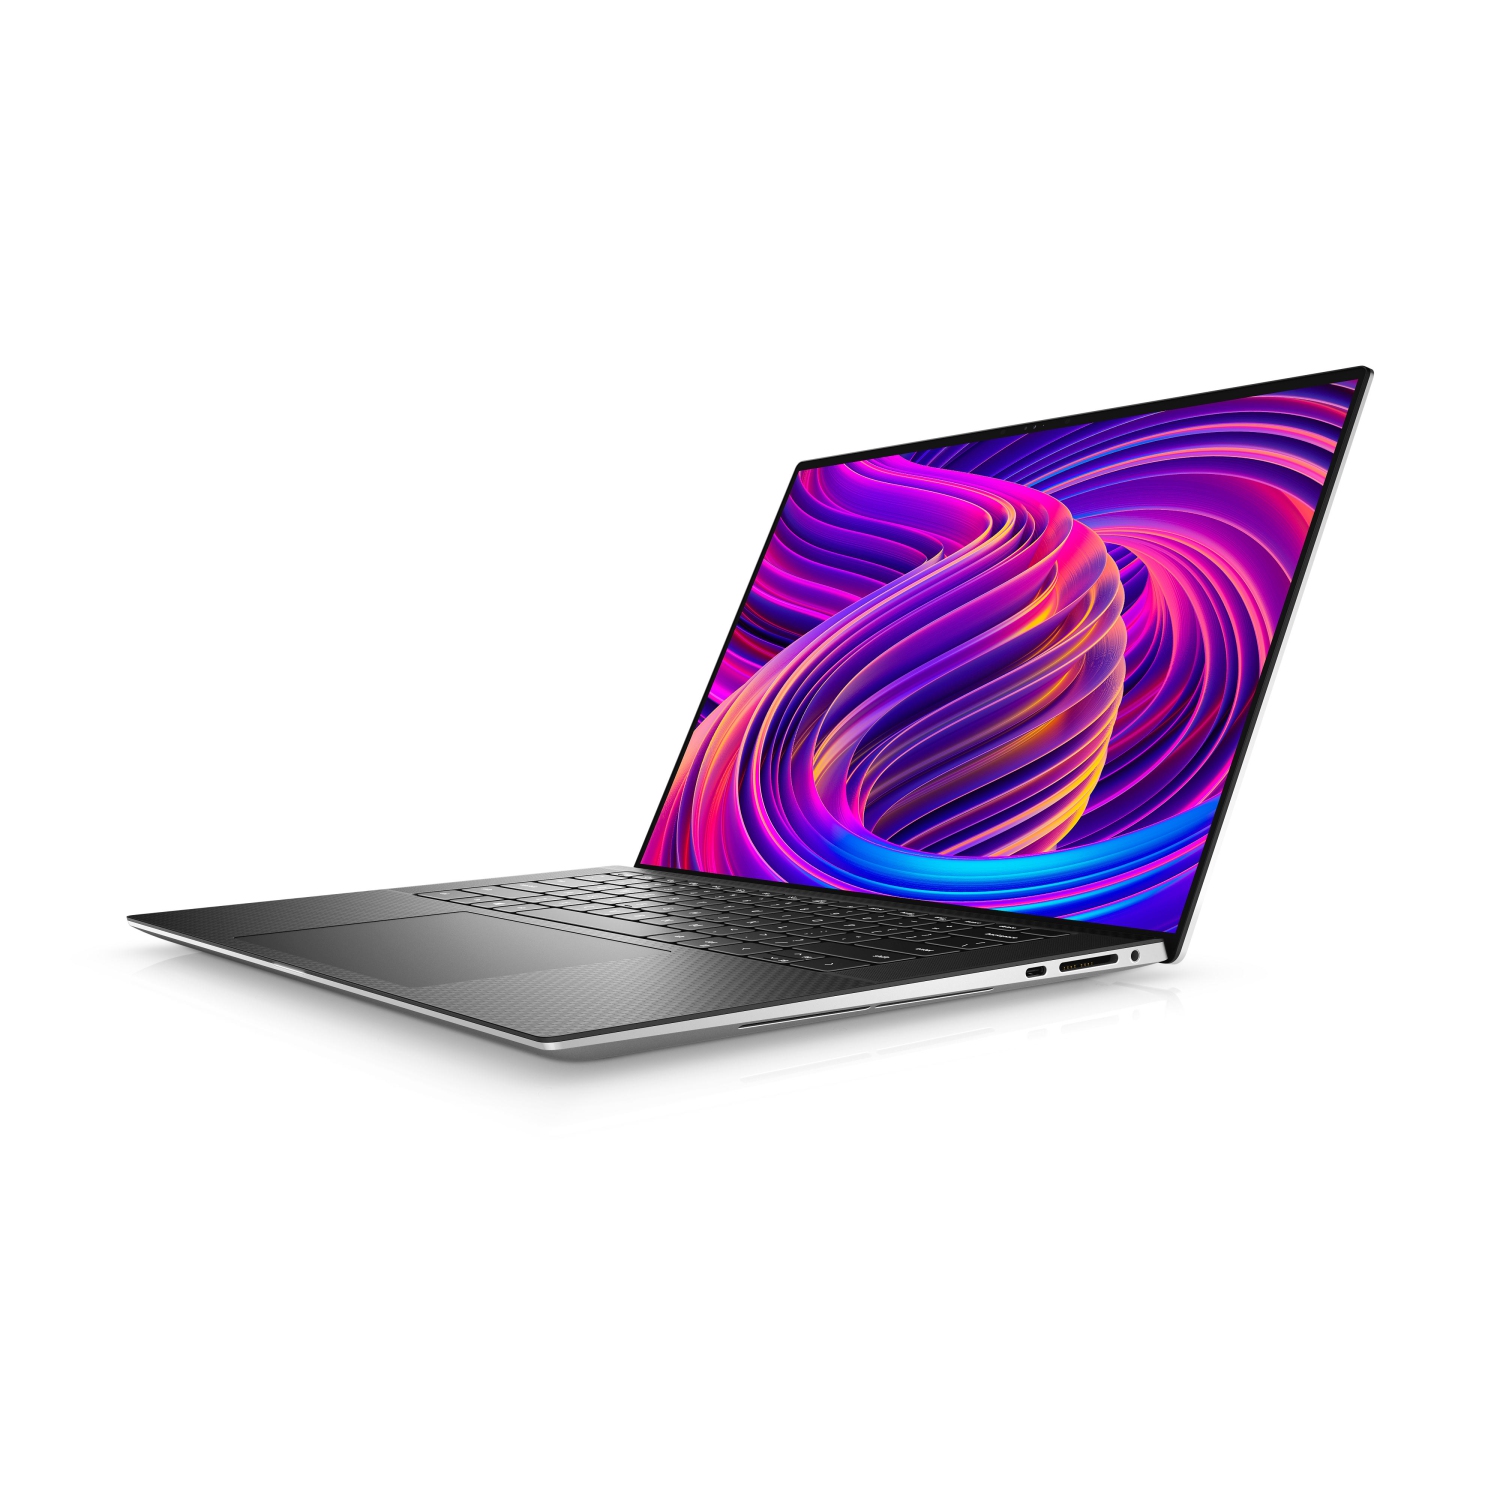 Refurbished (Excellent) - Dell XPS 15 9510 Laptop (2021) | 15.6" FHD+ | Core i7 - 512GB SSD - 16GB RAM - 3050 Ti | 8 Cores @ 4.6 GHz - 11th Gen CPU Certified Refurbished